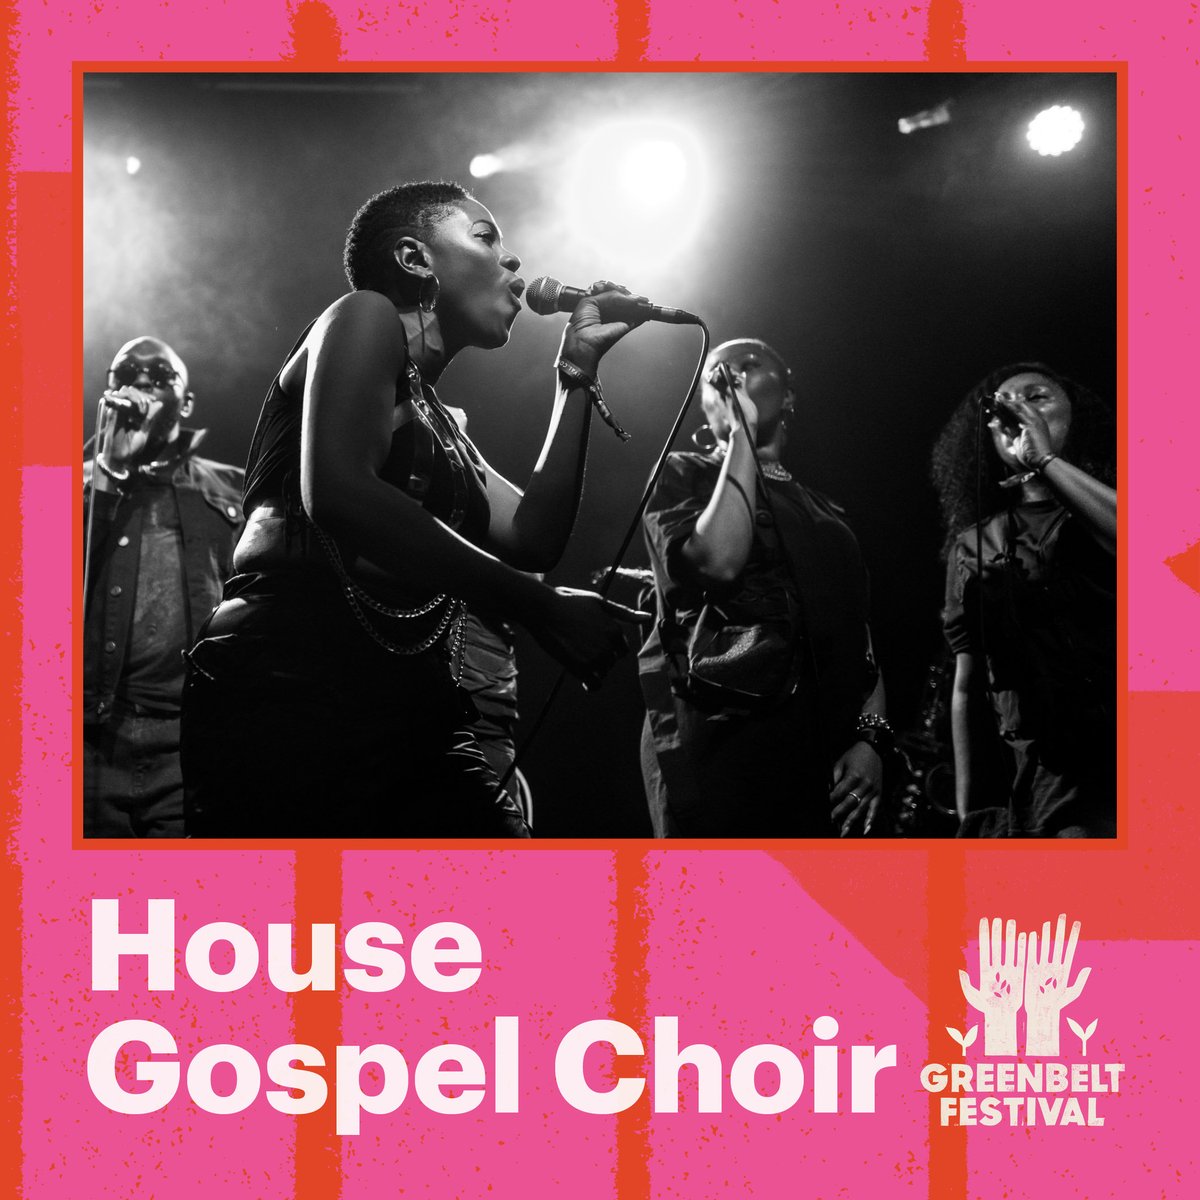 If we could convert happiness into electricity, we could have powered the entire festival with @HouseChoir’s set two summers ago. And we’re delighted to welcome their empowering, inclusive, uplifting tunes full of serotonin highs back.